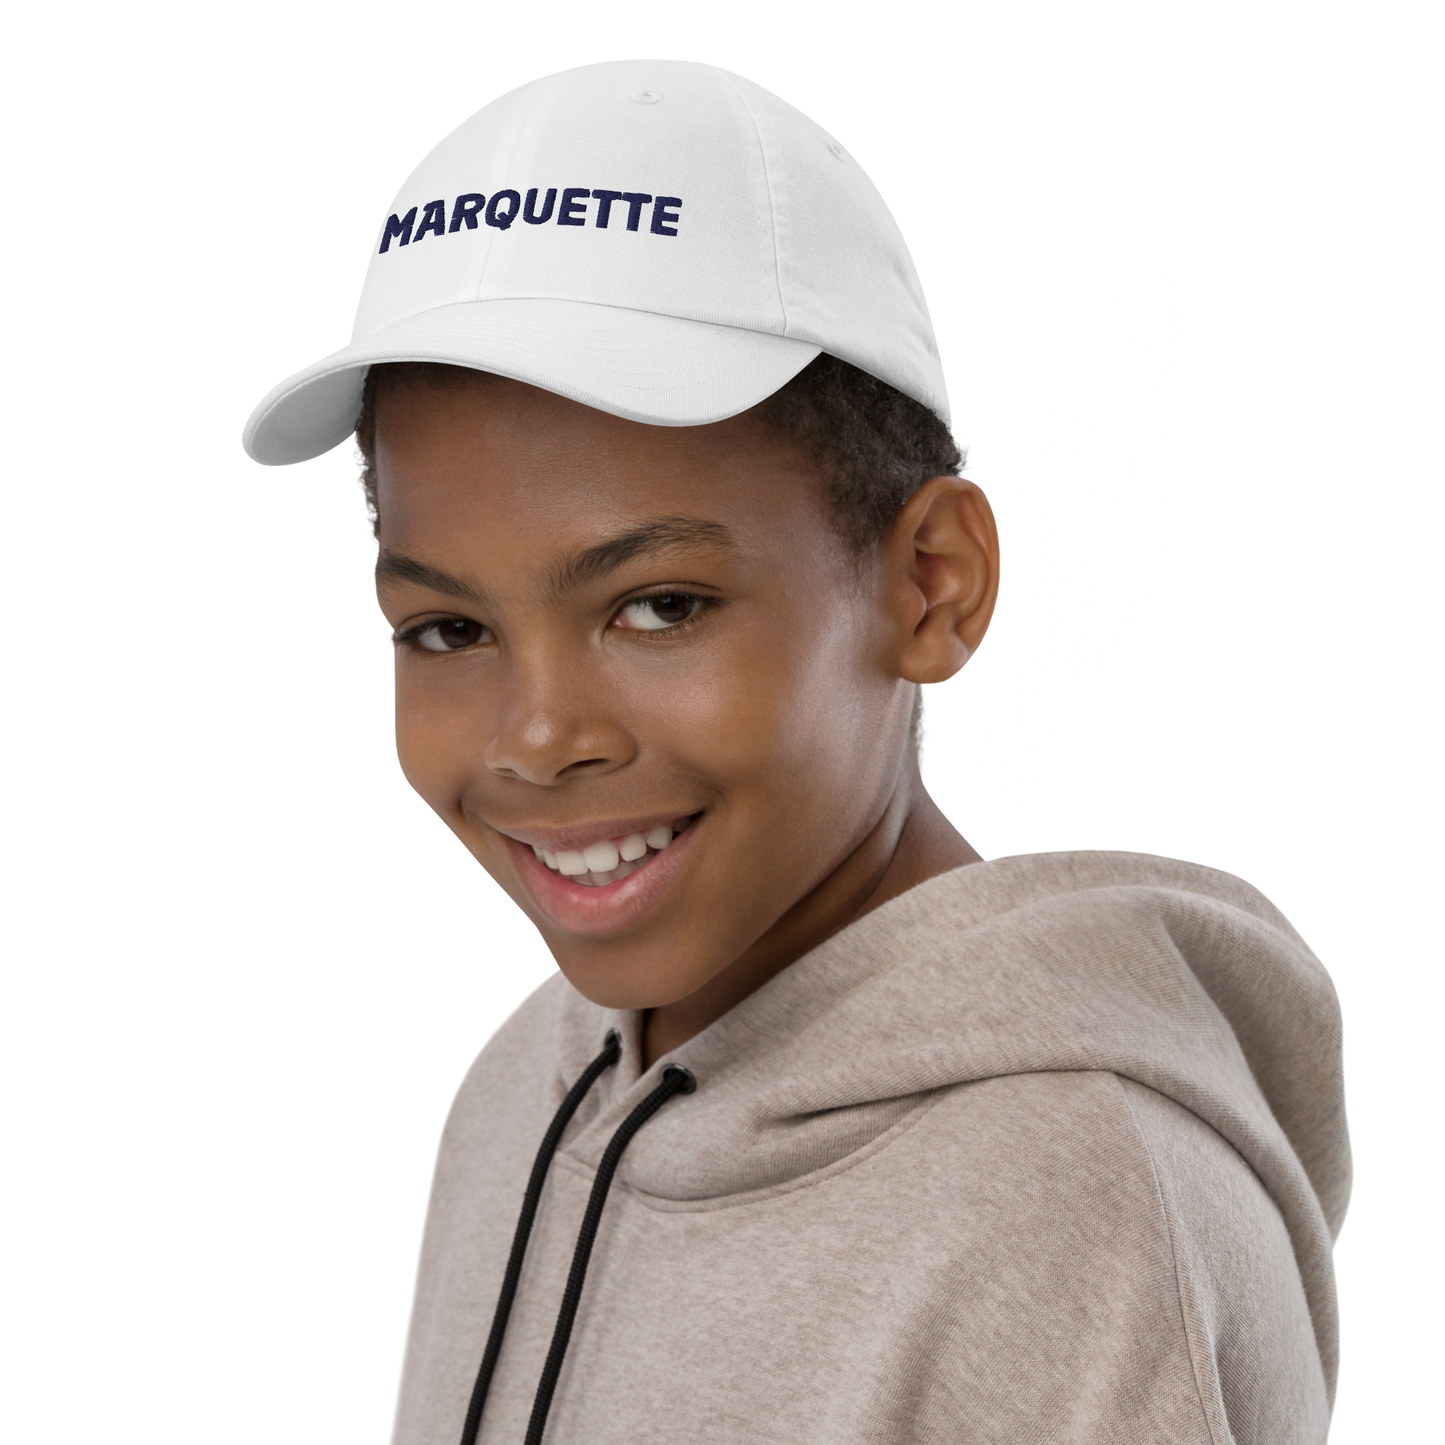 'Marquette' Youth Baseball Cap | White/Navy Embroidery